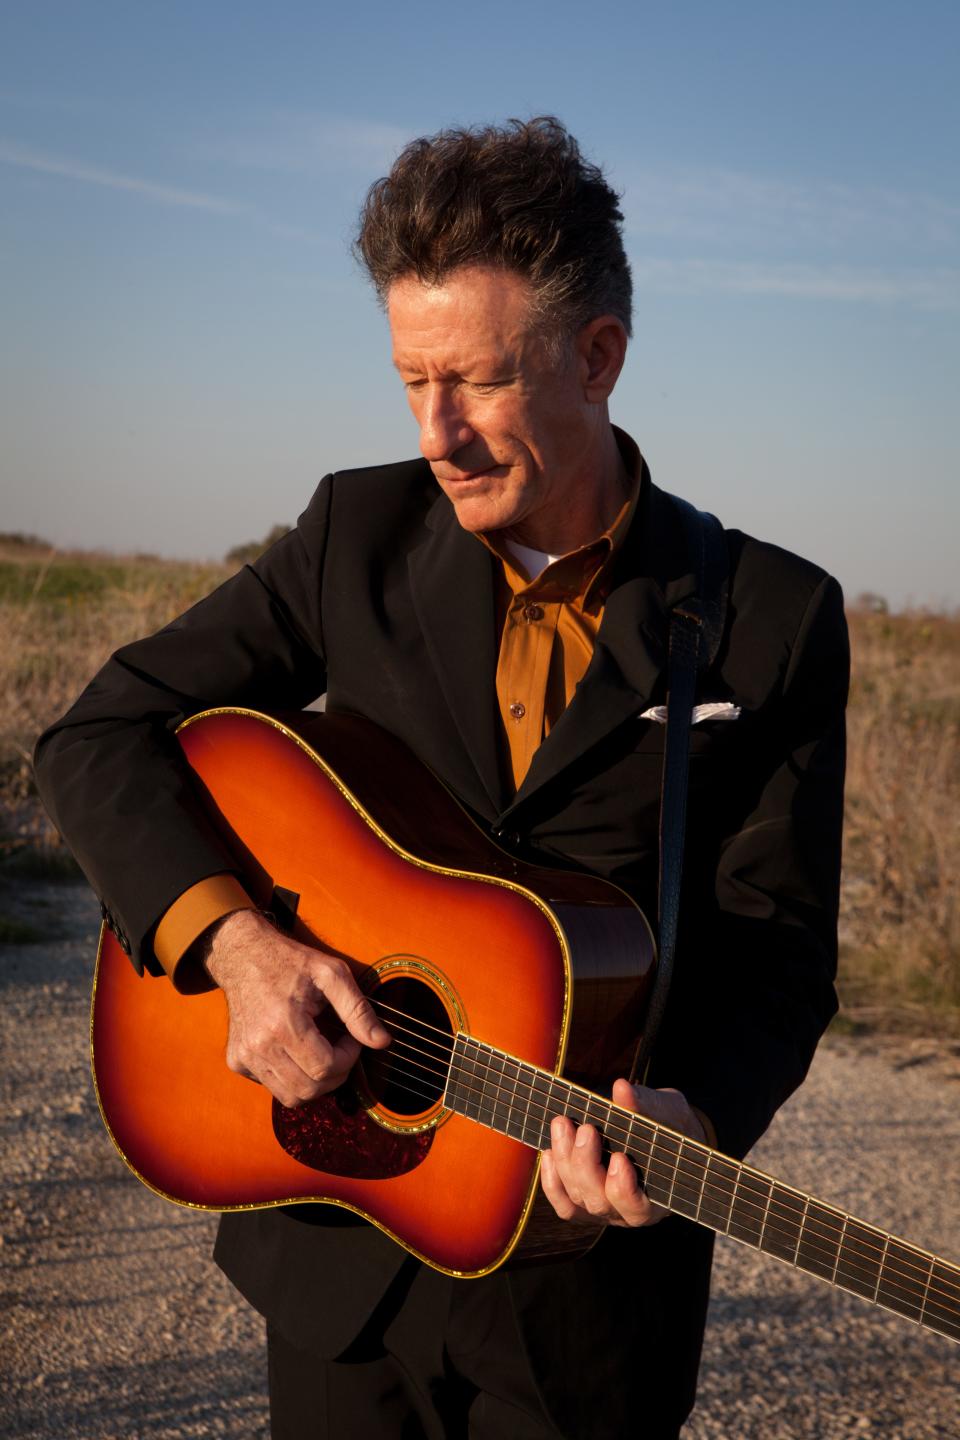 Lyle Lovett's family inspired some of the music on his new album "12th of June."